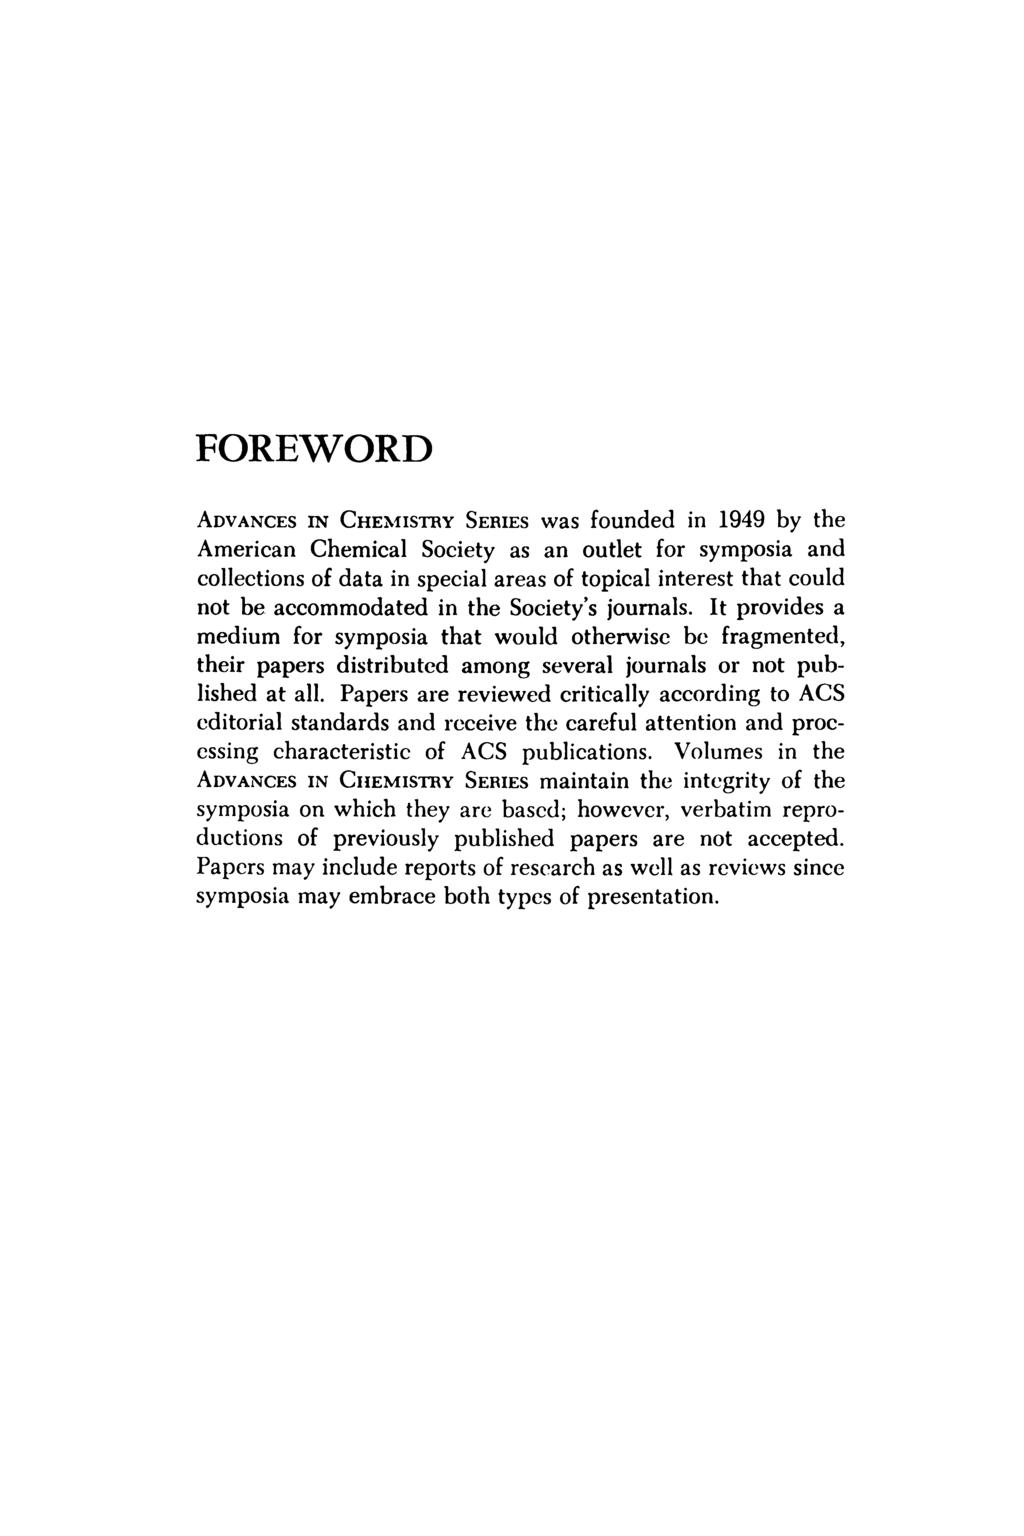 FOREWORD ADVANCES IN CHEMISTRY SERIES was founded in 1949 by the American Chemical Society as an outlet for symposia and collections of data in special areas of topical interest that could not be